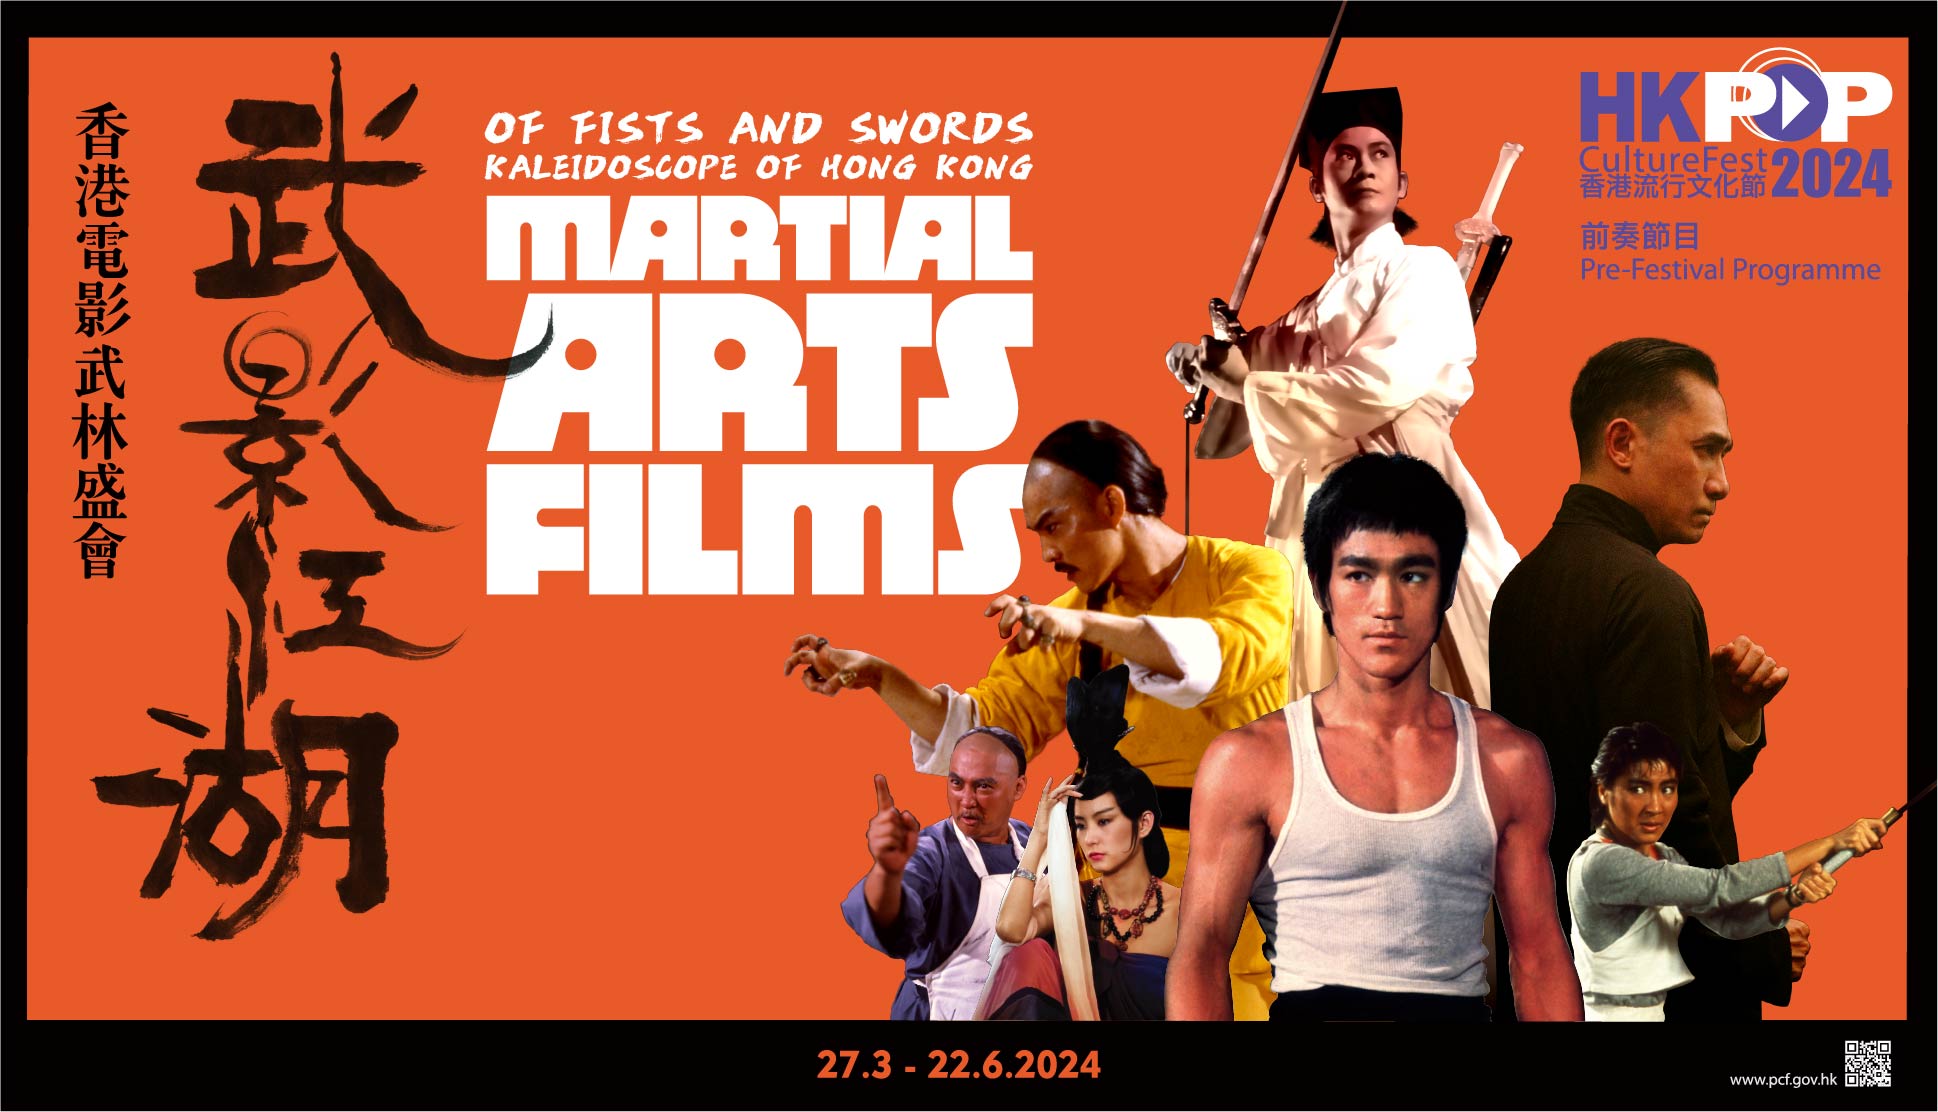 Of Fists and Swords – Kaleidoscope of Hong Kong Martial Arts Films